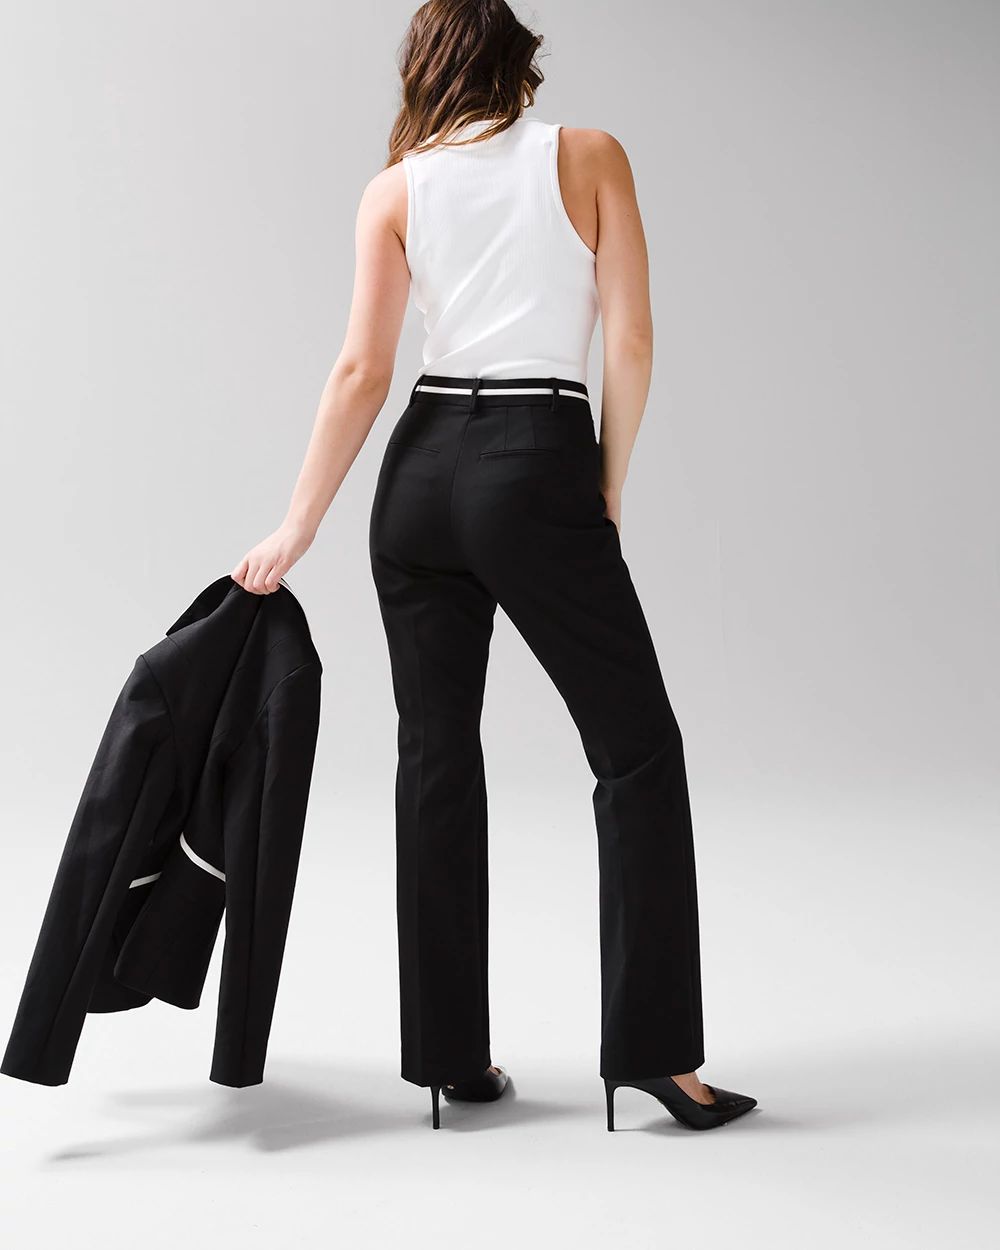 Curvy WHBM® Ines Slim Bootcut Comfort Stretch Colorblack Pant click to view larger image.